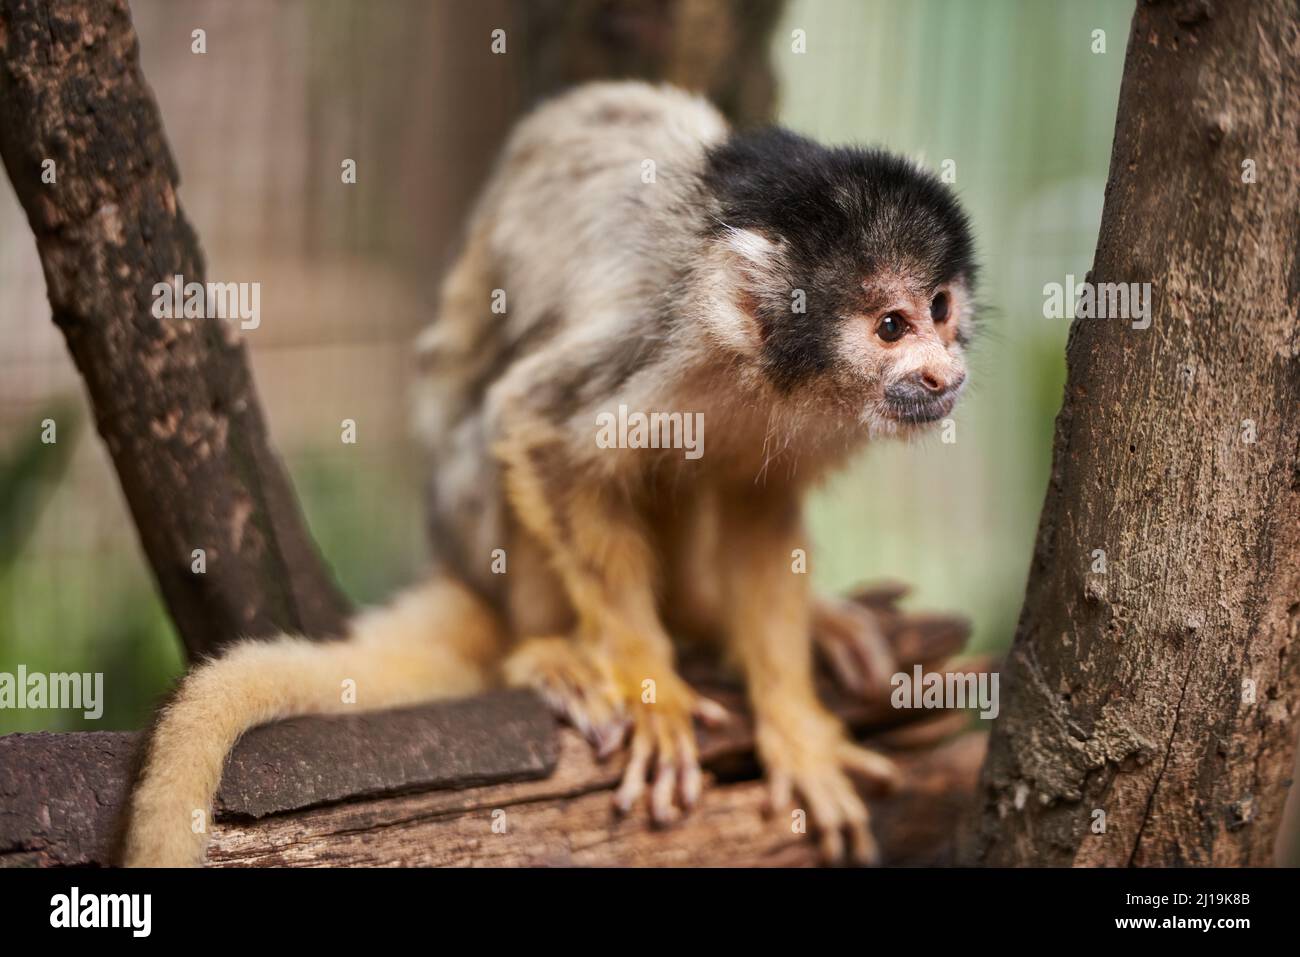 Curious about the world. Shot of a cute little monkey in a sactuary. Stock Photo